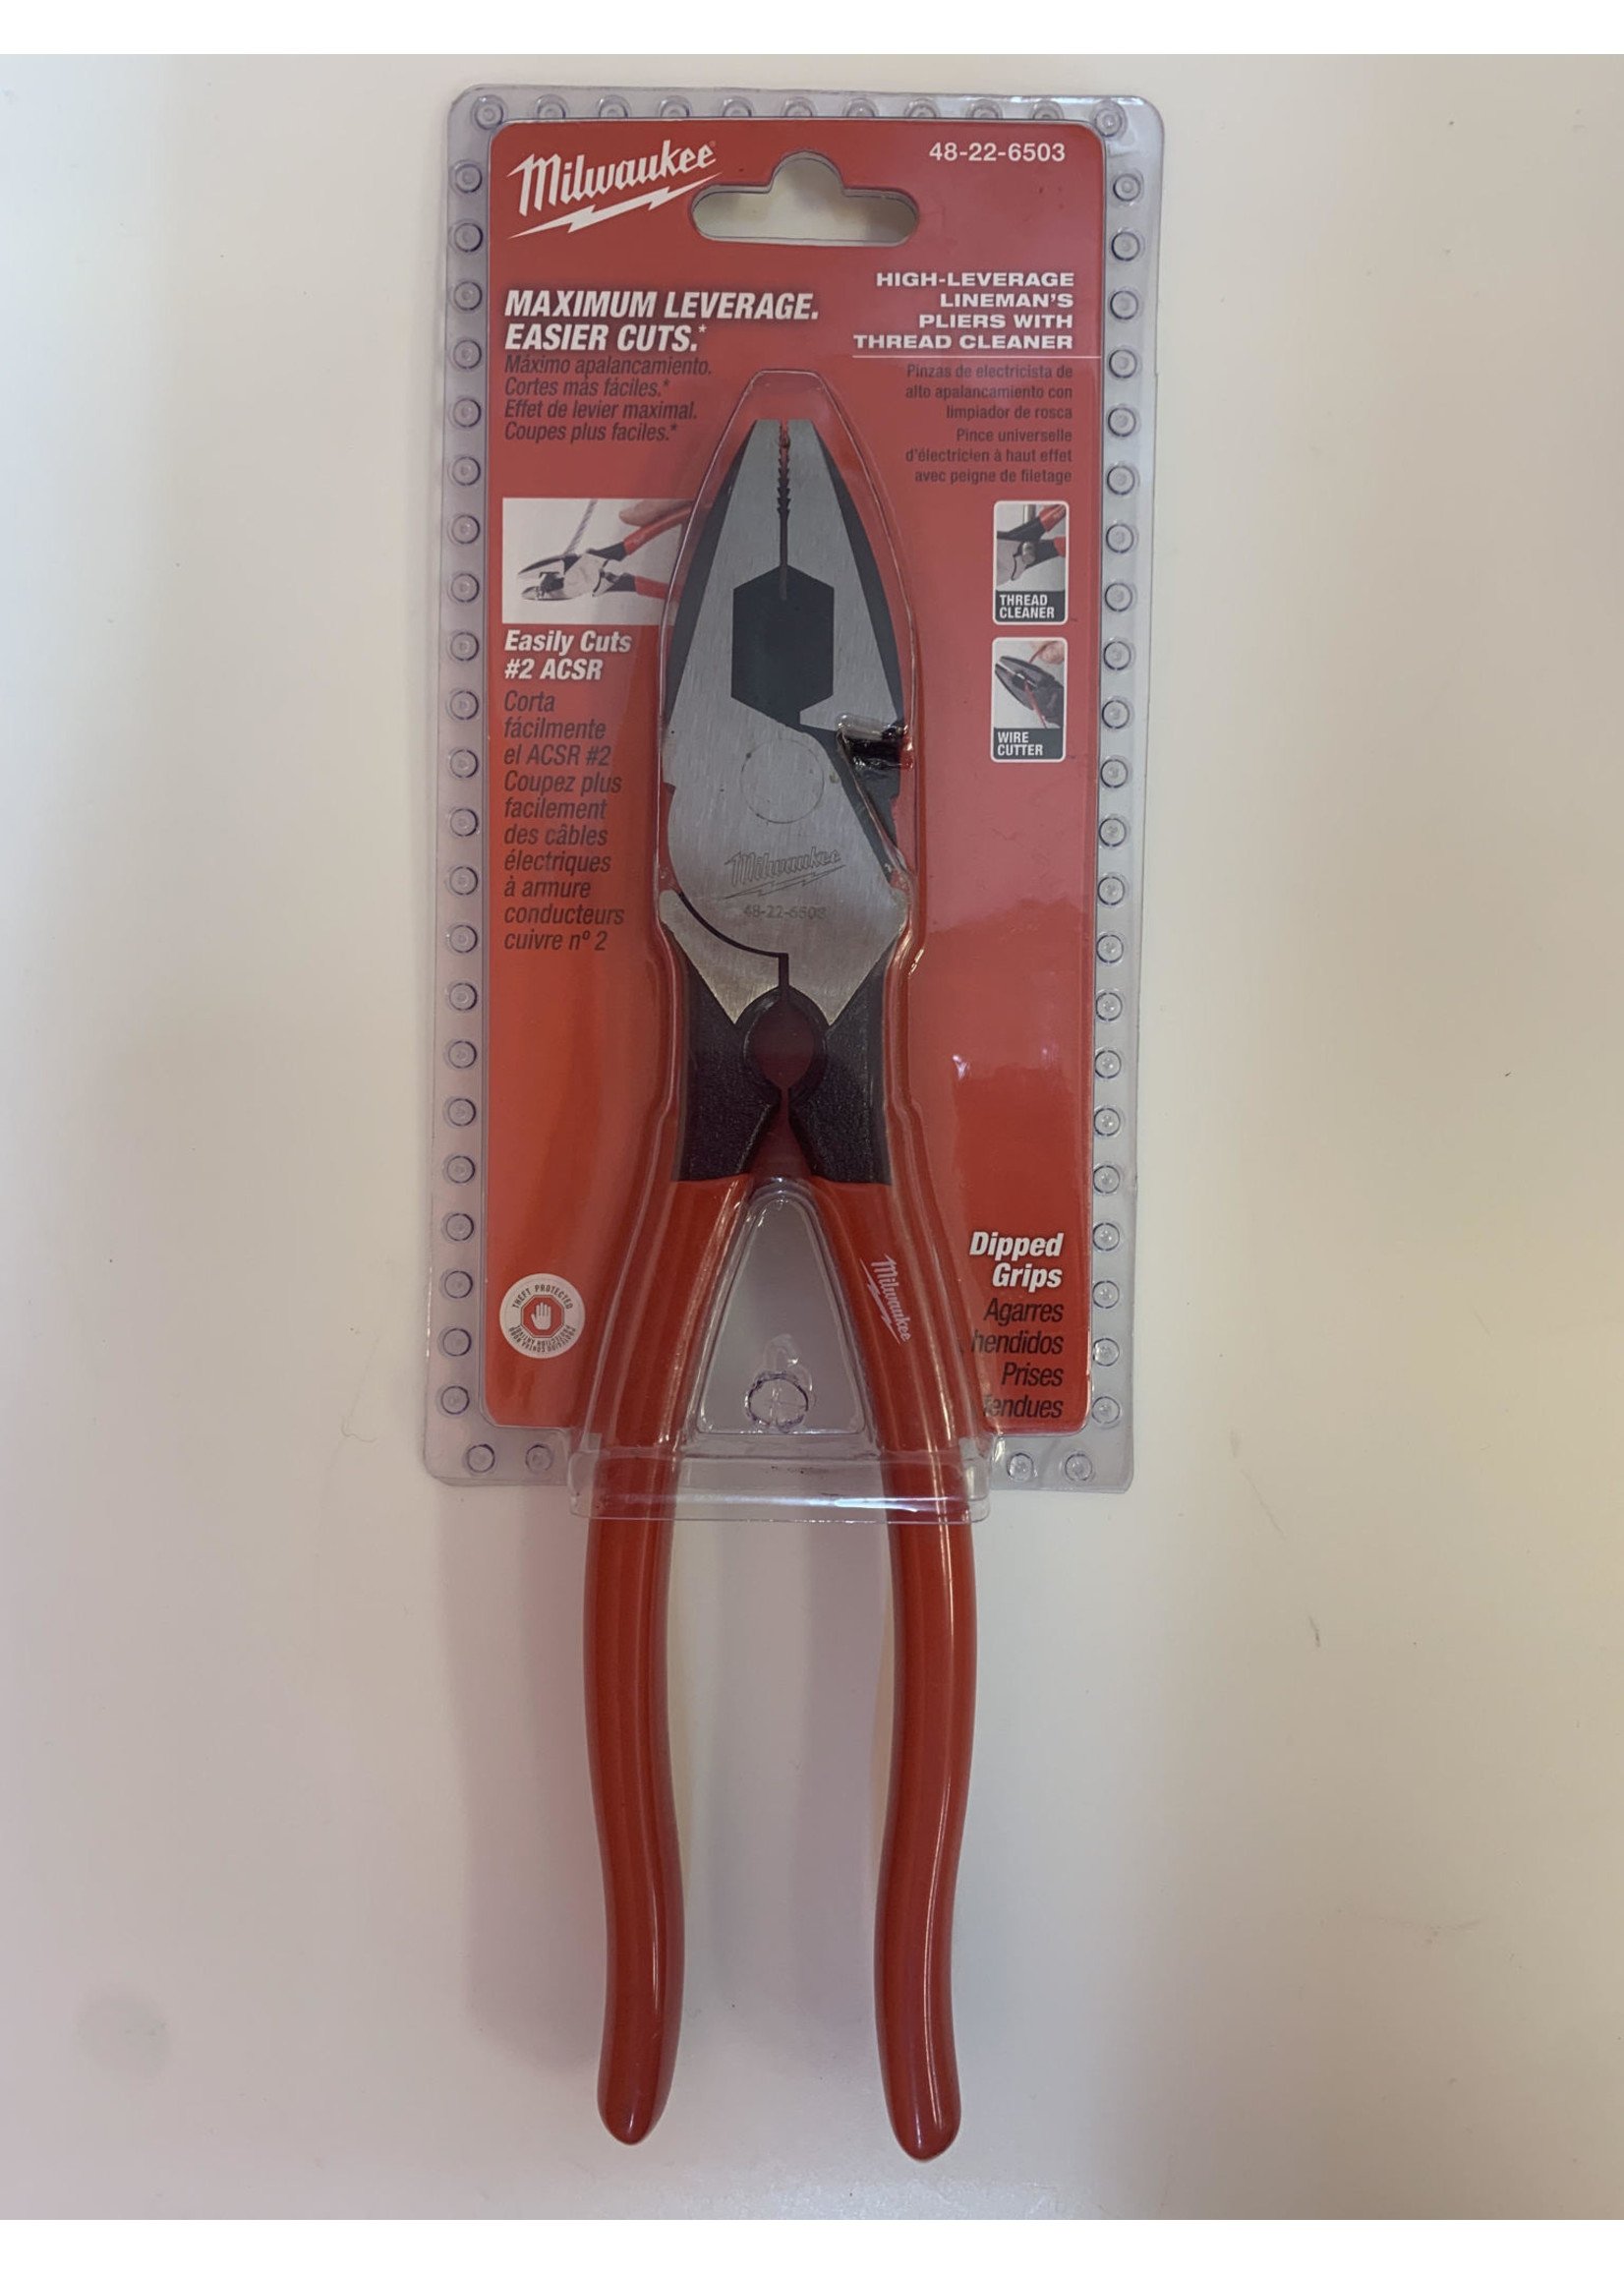 MILWAUKEE HIGH LEVERAGE LINEMANS PLIERS WITH THREAD CLEANER (48-22-6503)